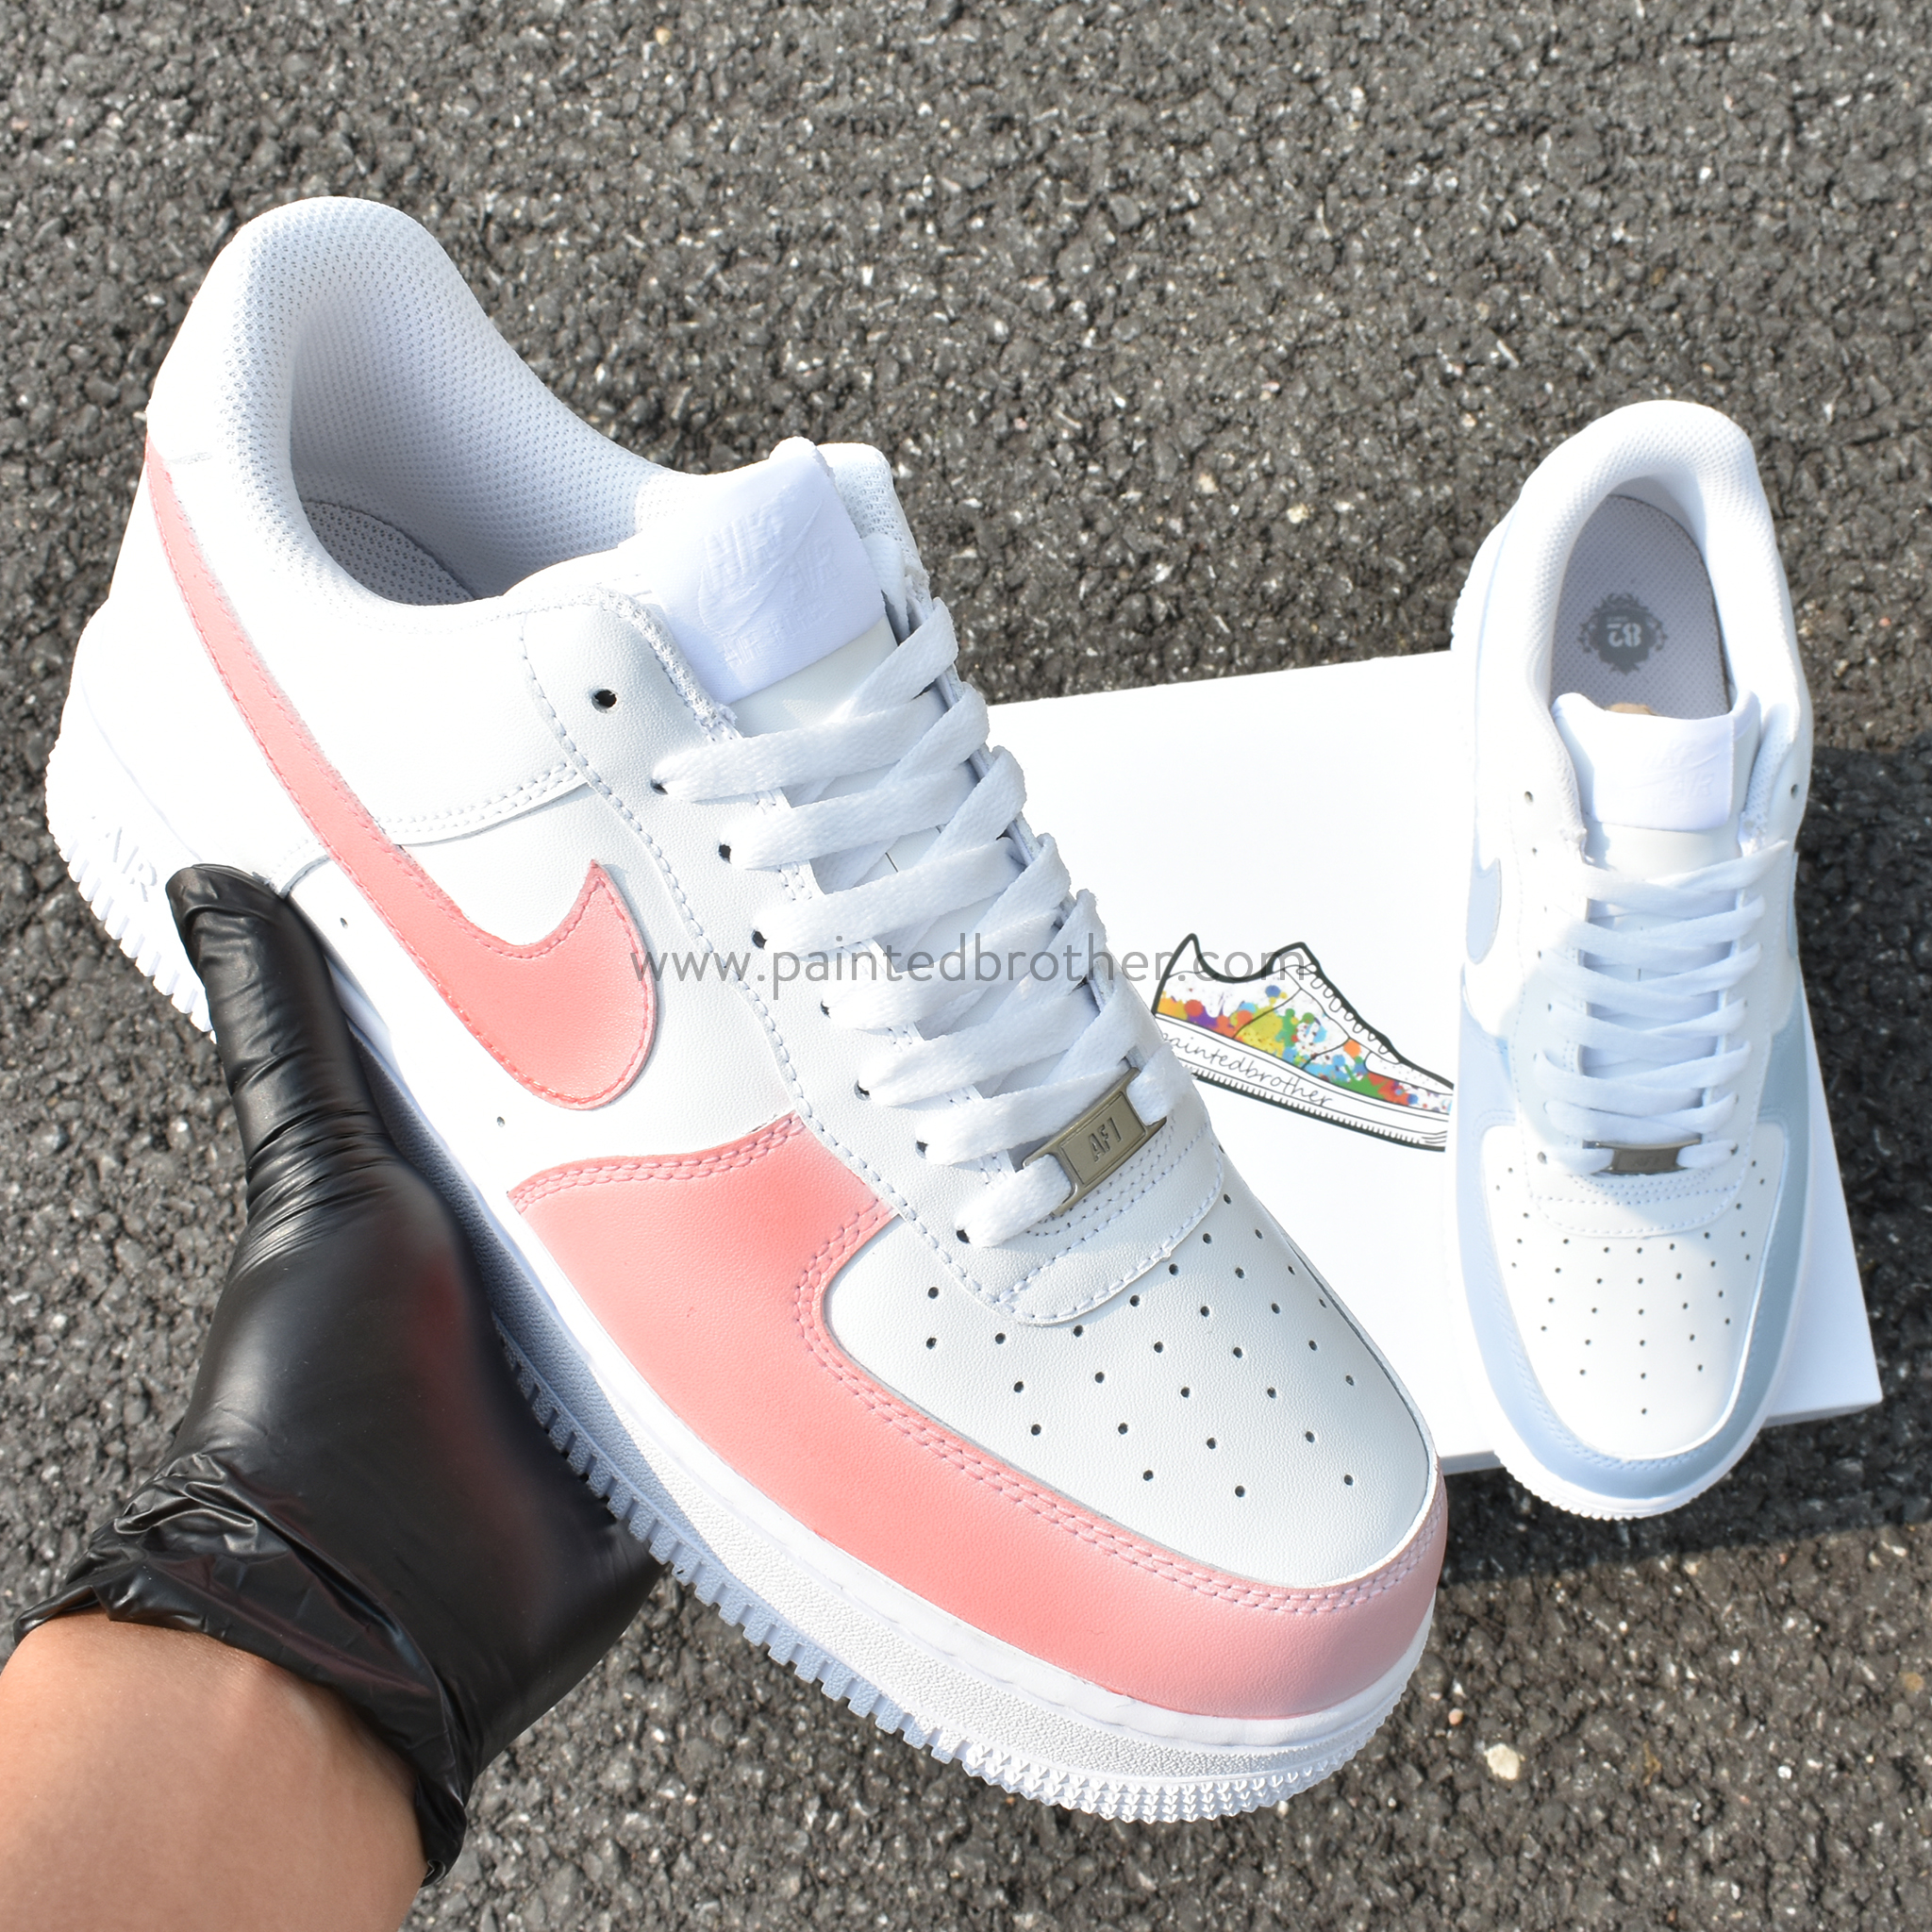 Custom Hand Painted Chameleon Nike Air Force 1 Low